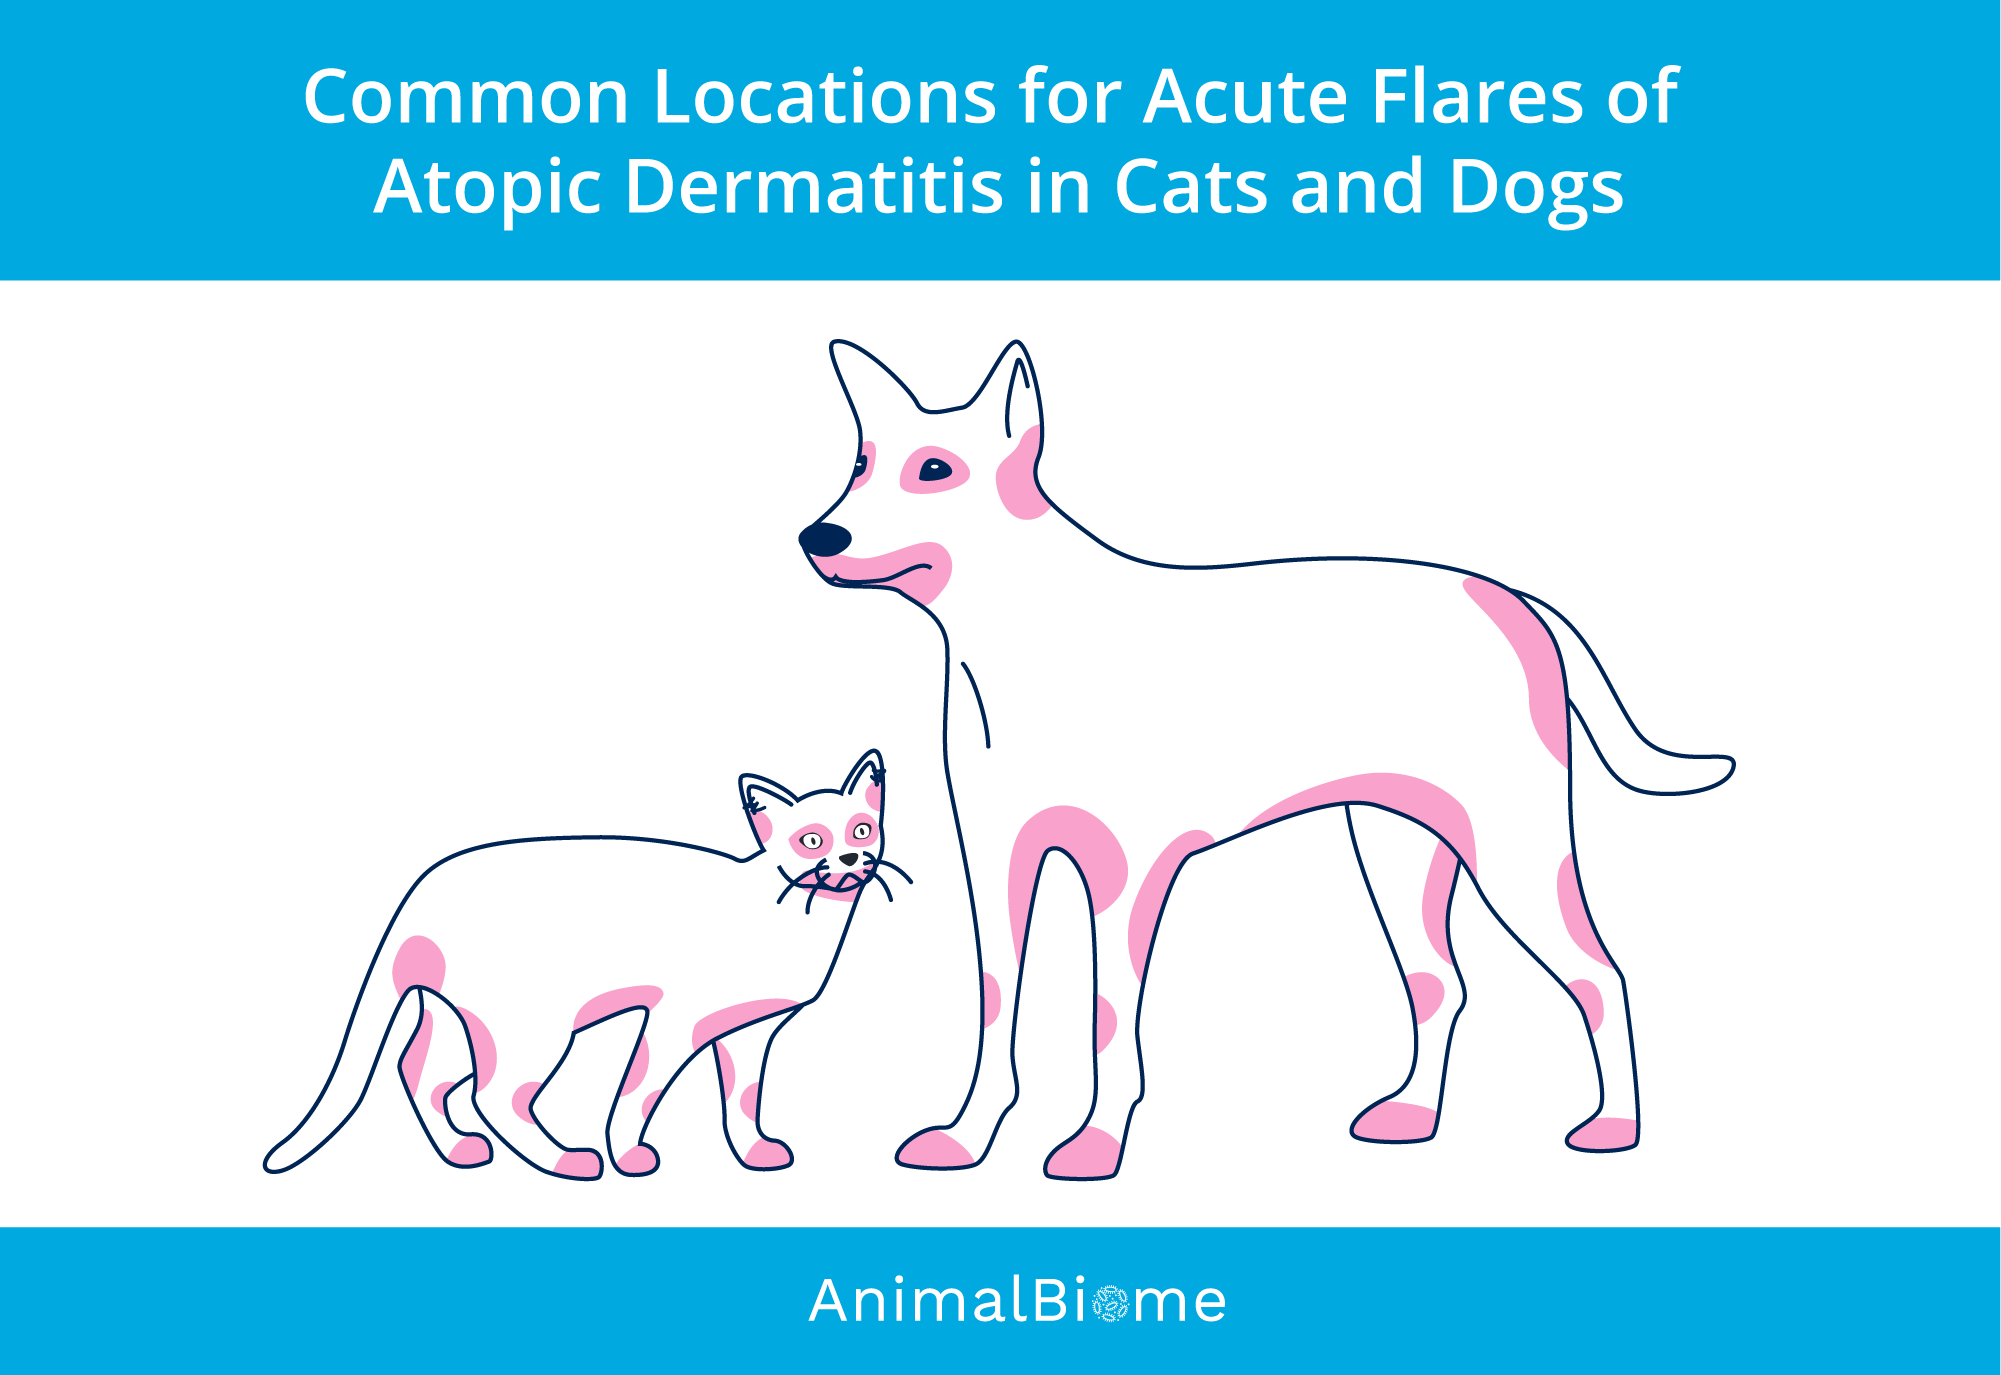 Picture of acute flares of dog atopic dermatitis and cat atopic dermatitis